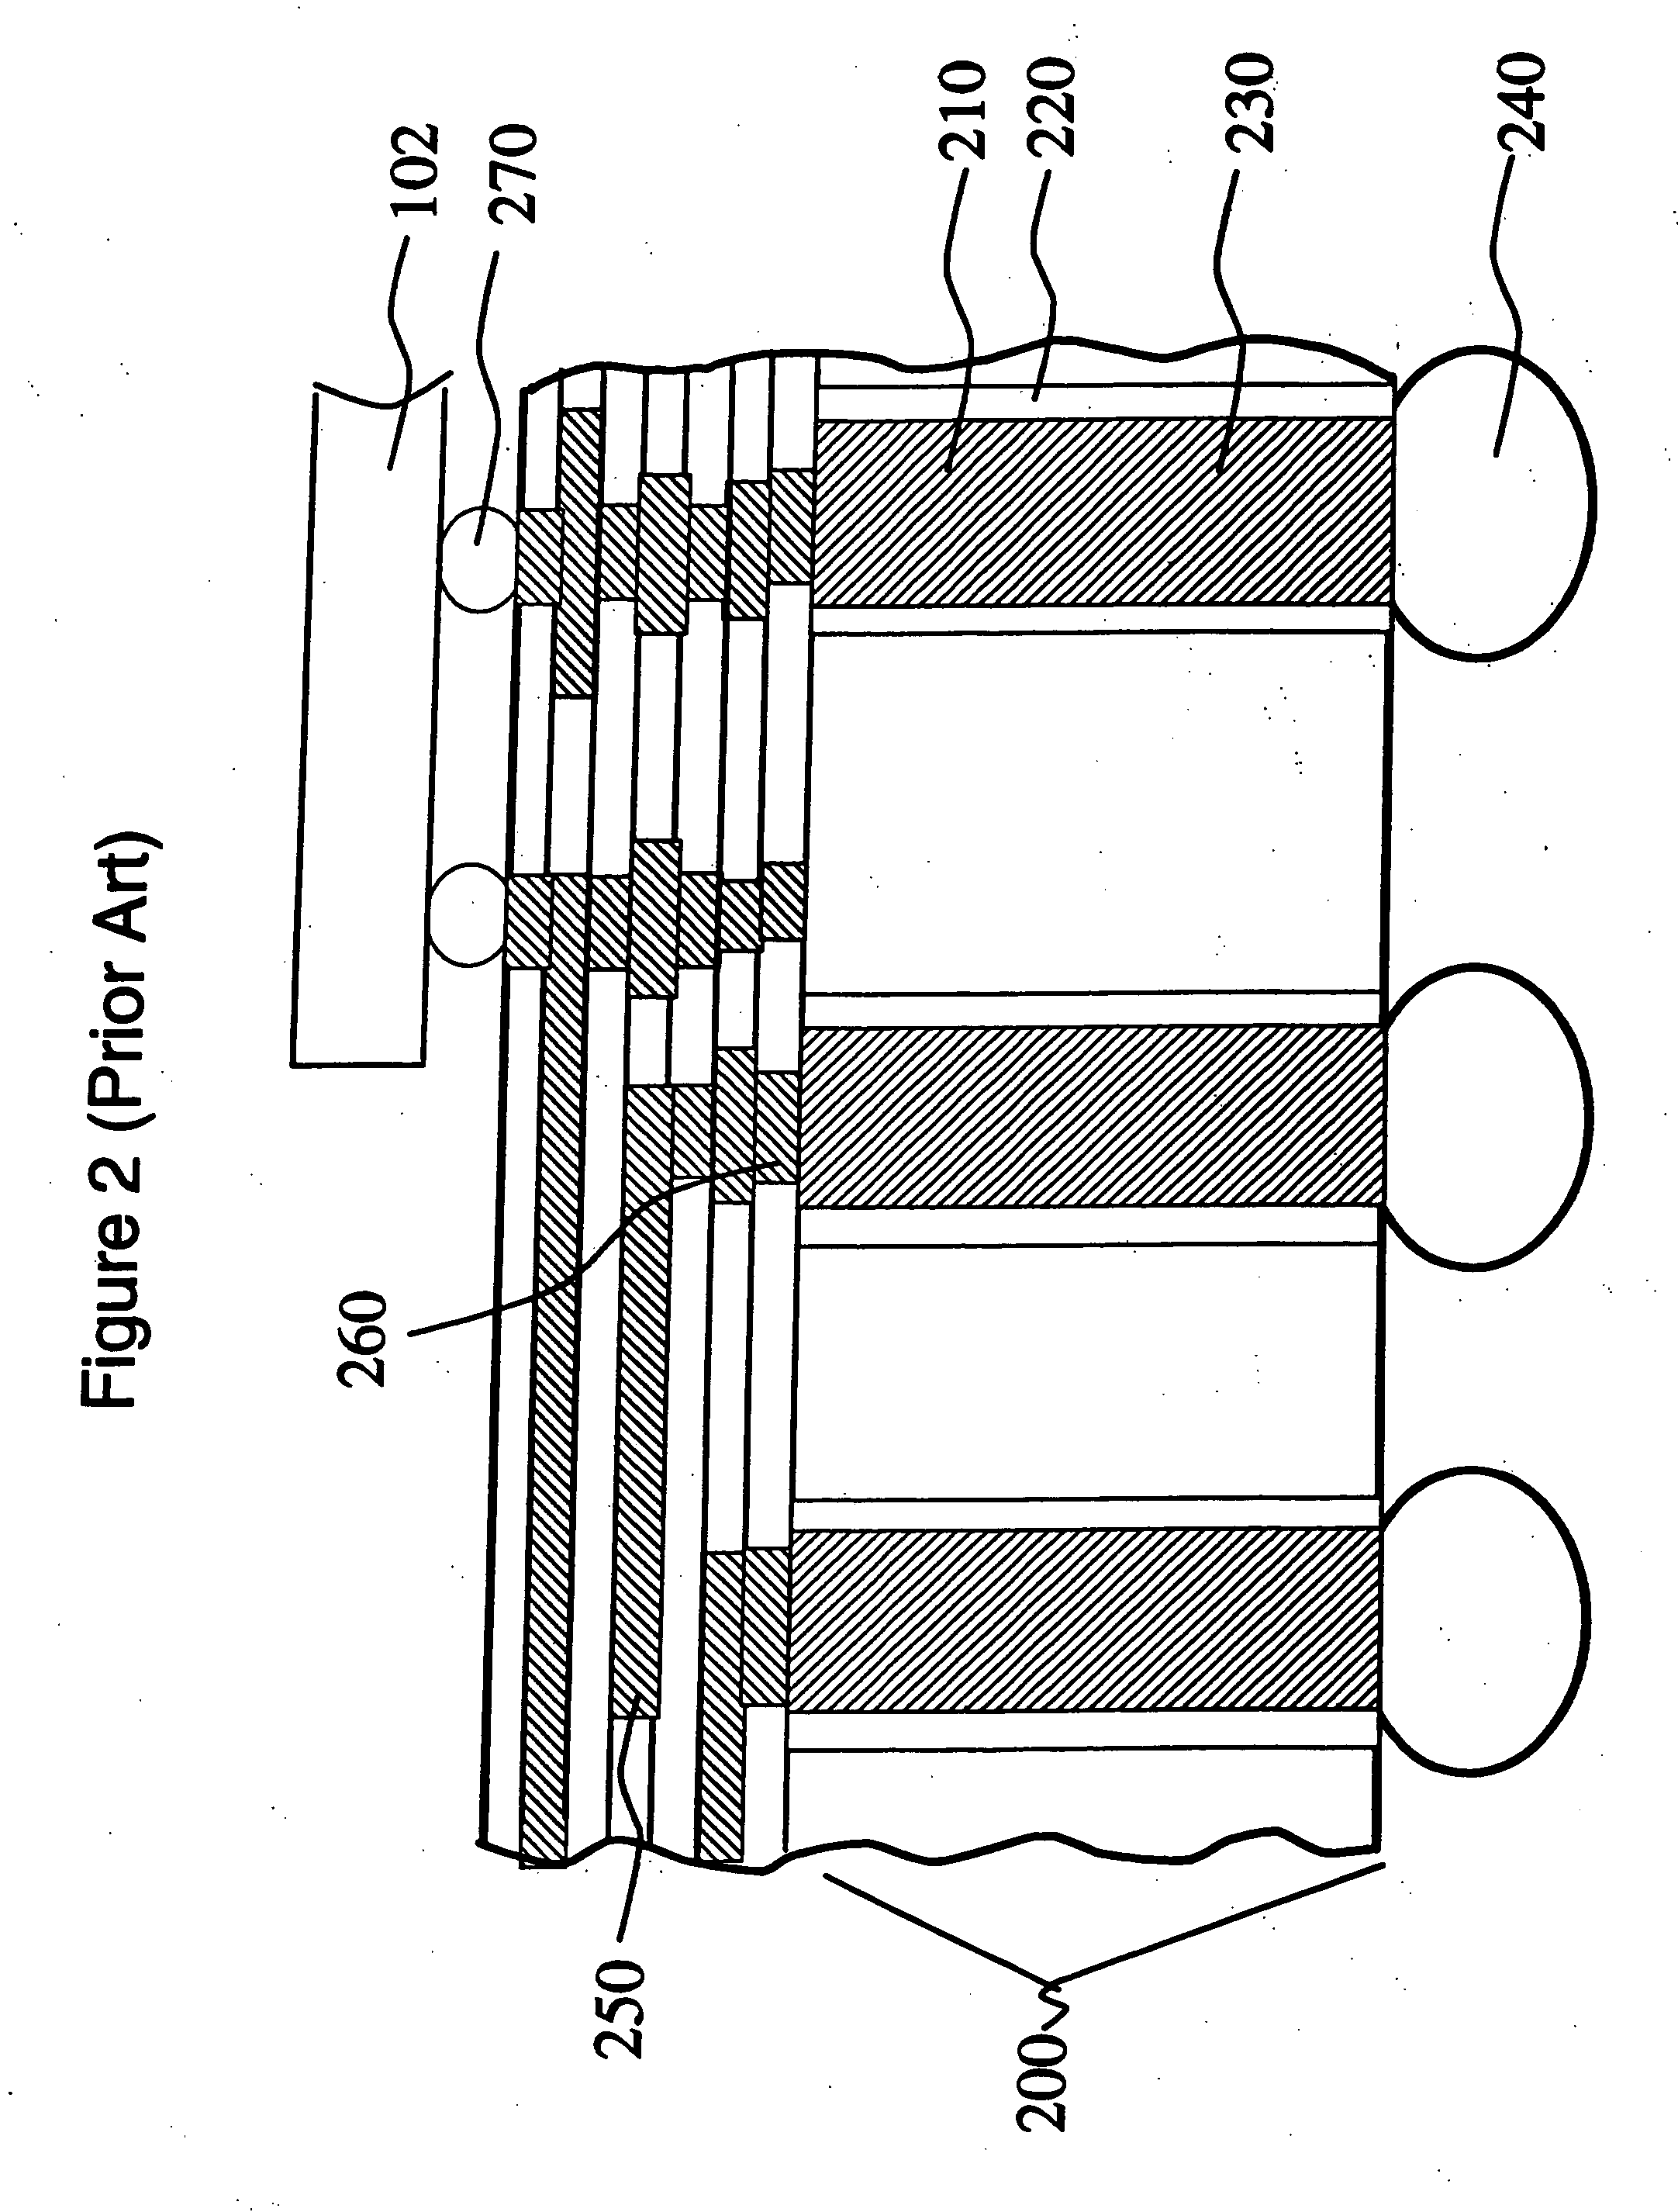 High density chip carrier with integrated passive devices